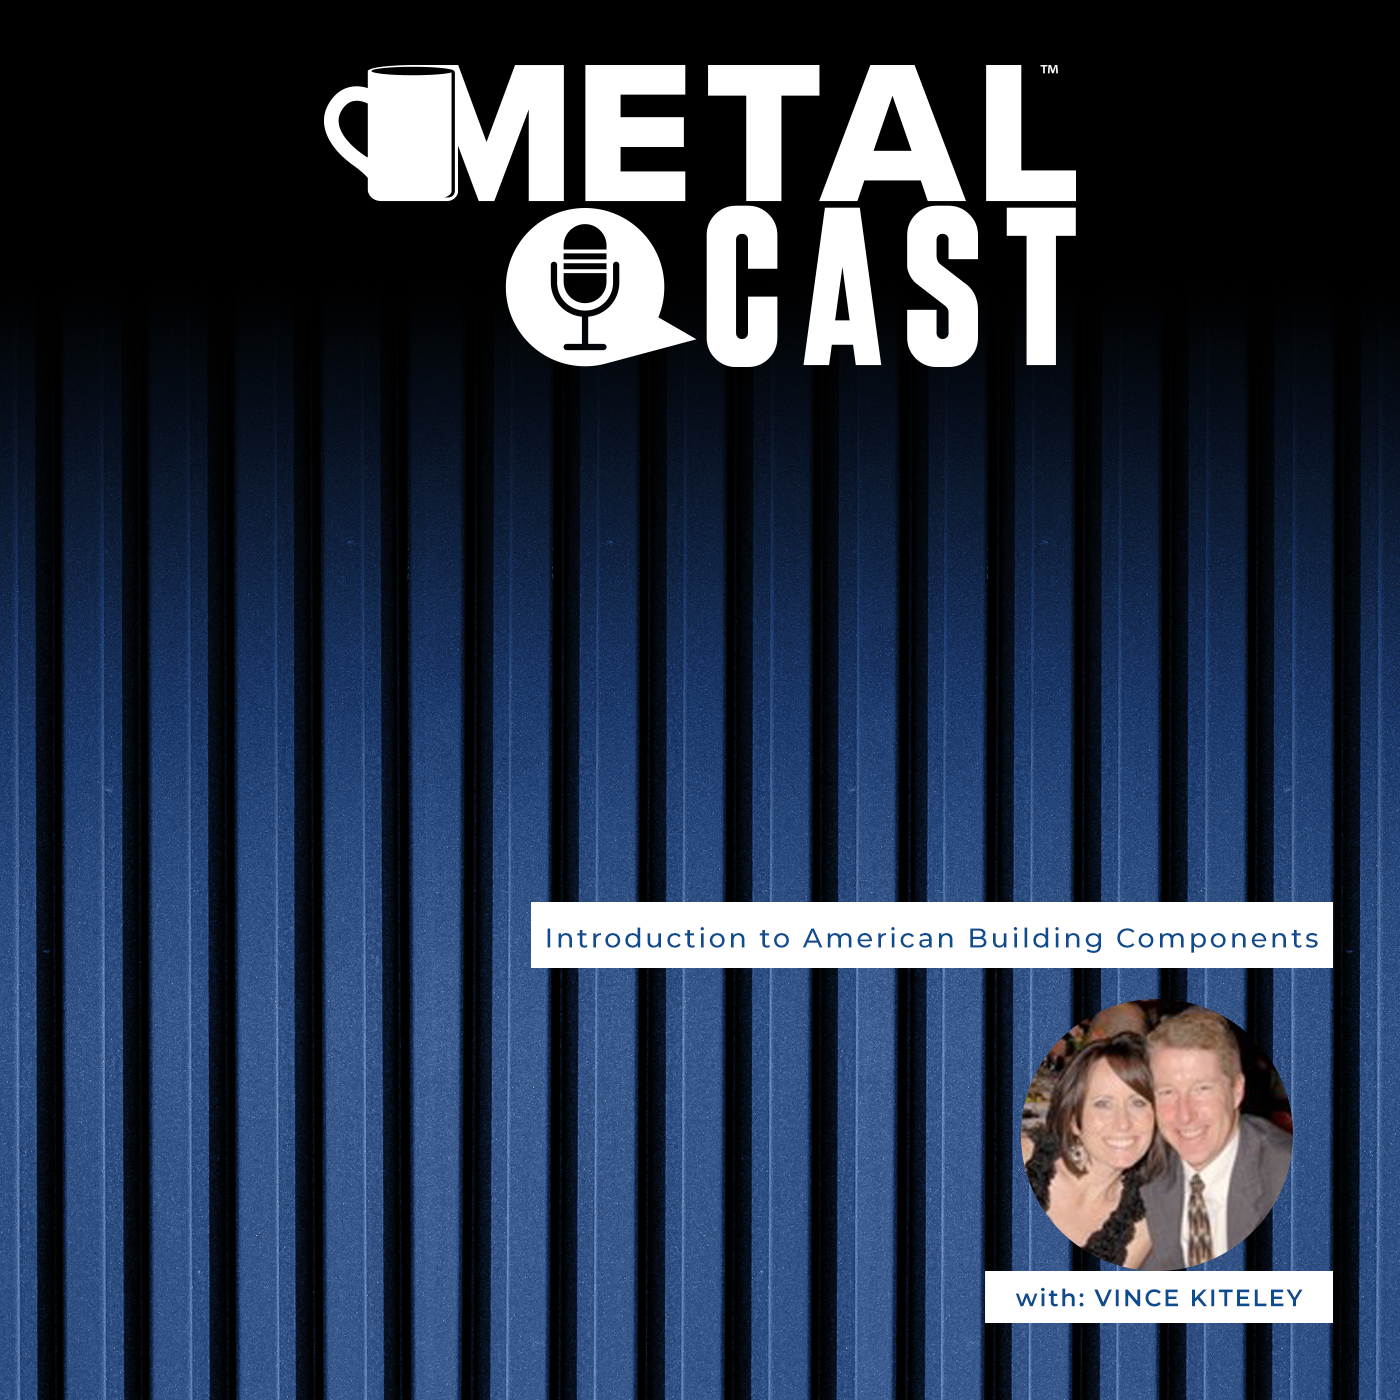 ABC - MetalCast with Vince